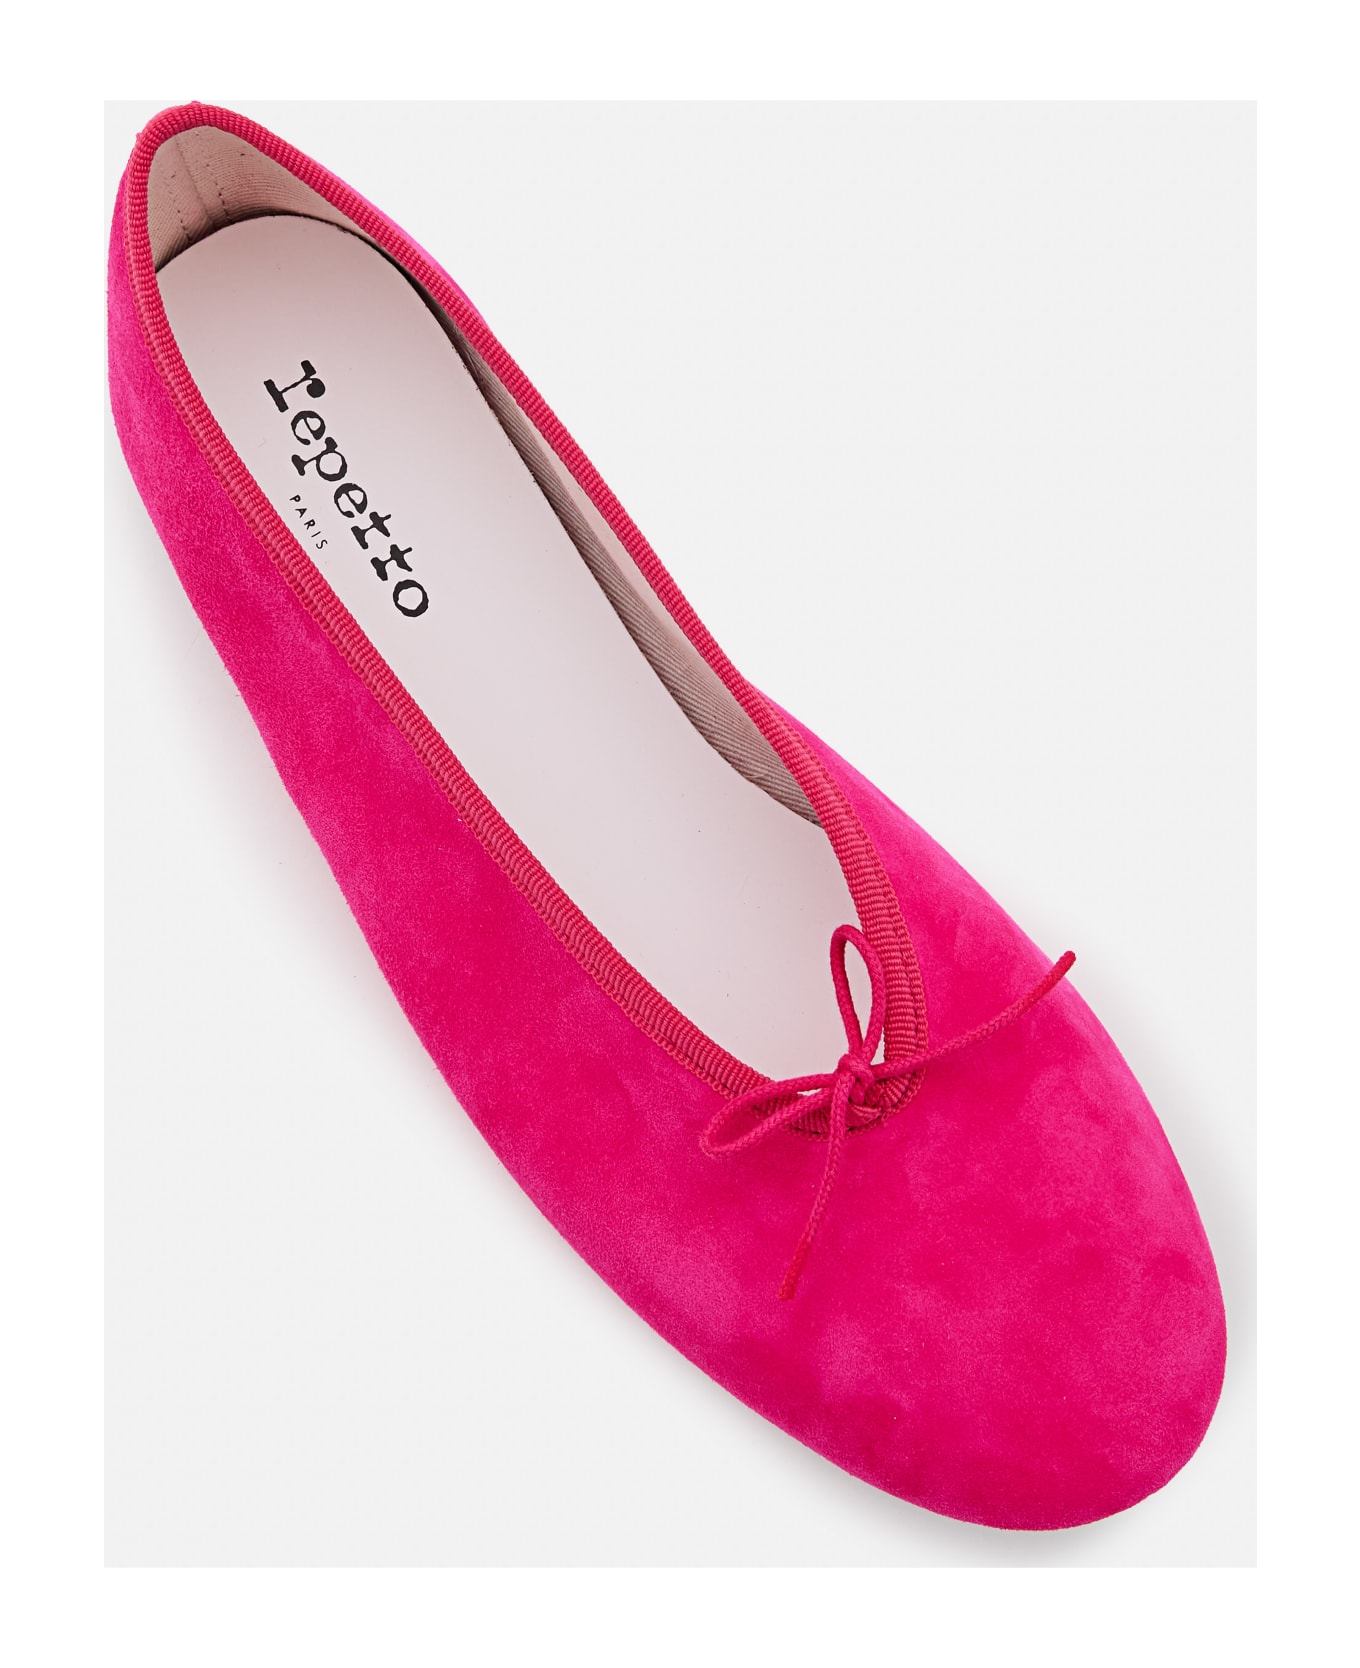 Repetto Lilouh Leather Ballerinas - Pink